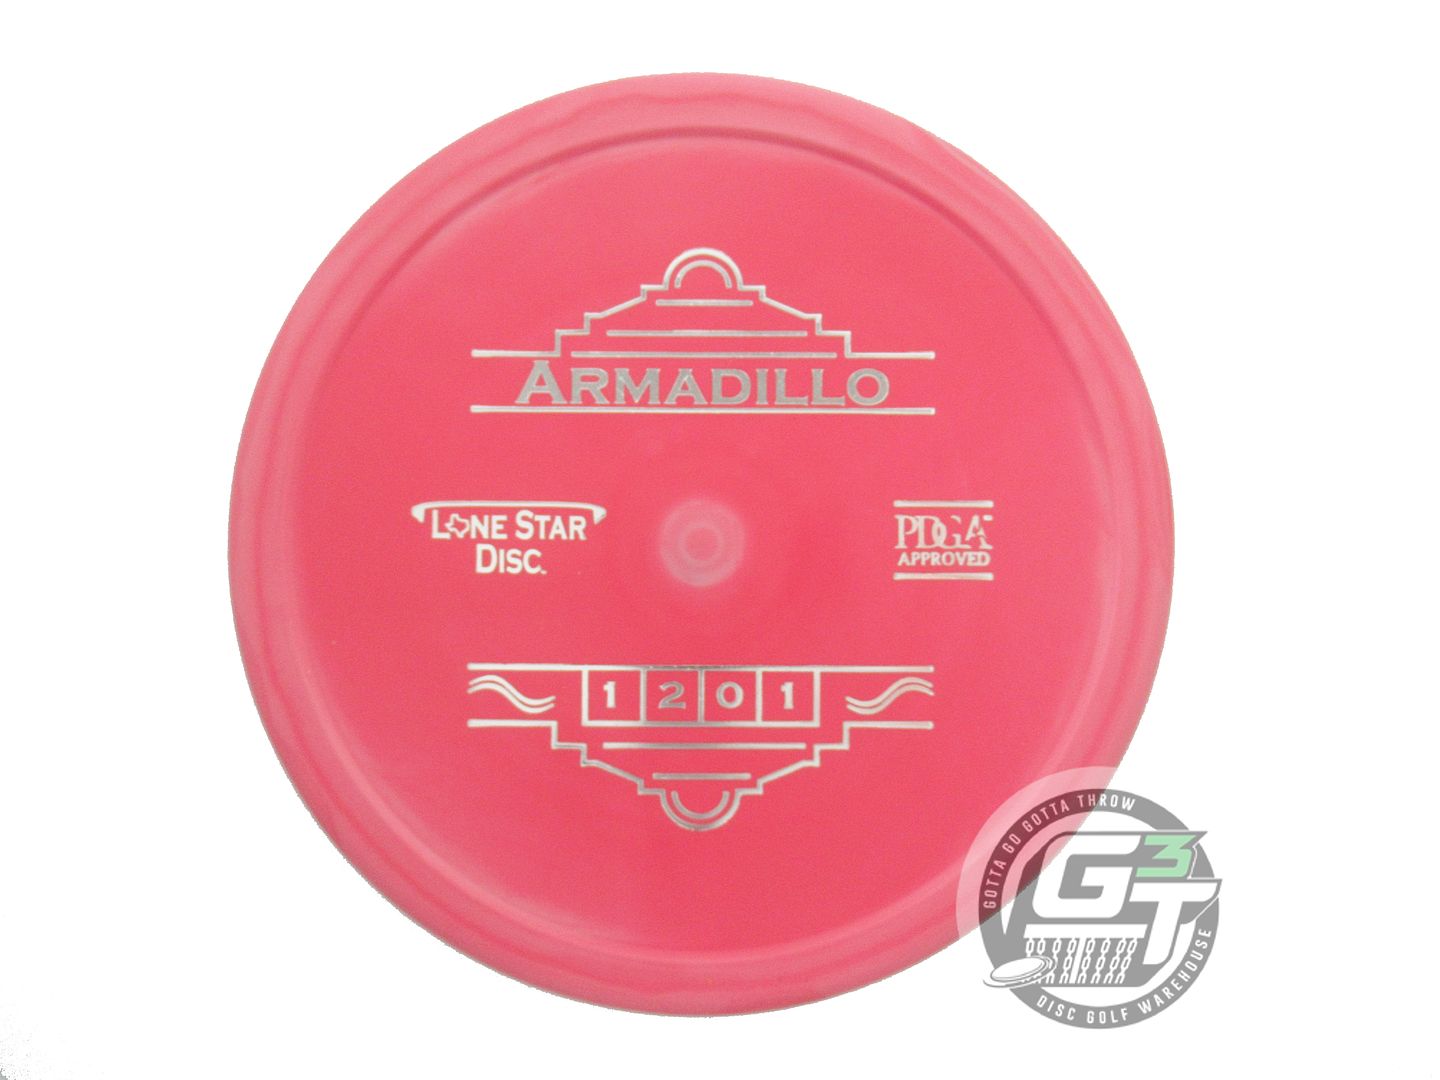 Lone Star Victor 1 Armadillo Putter Golf Disc (Individually Listed)